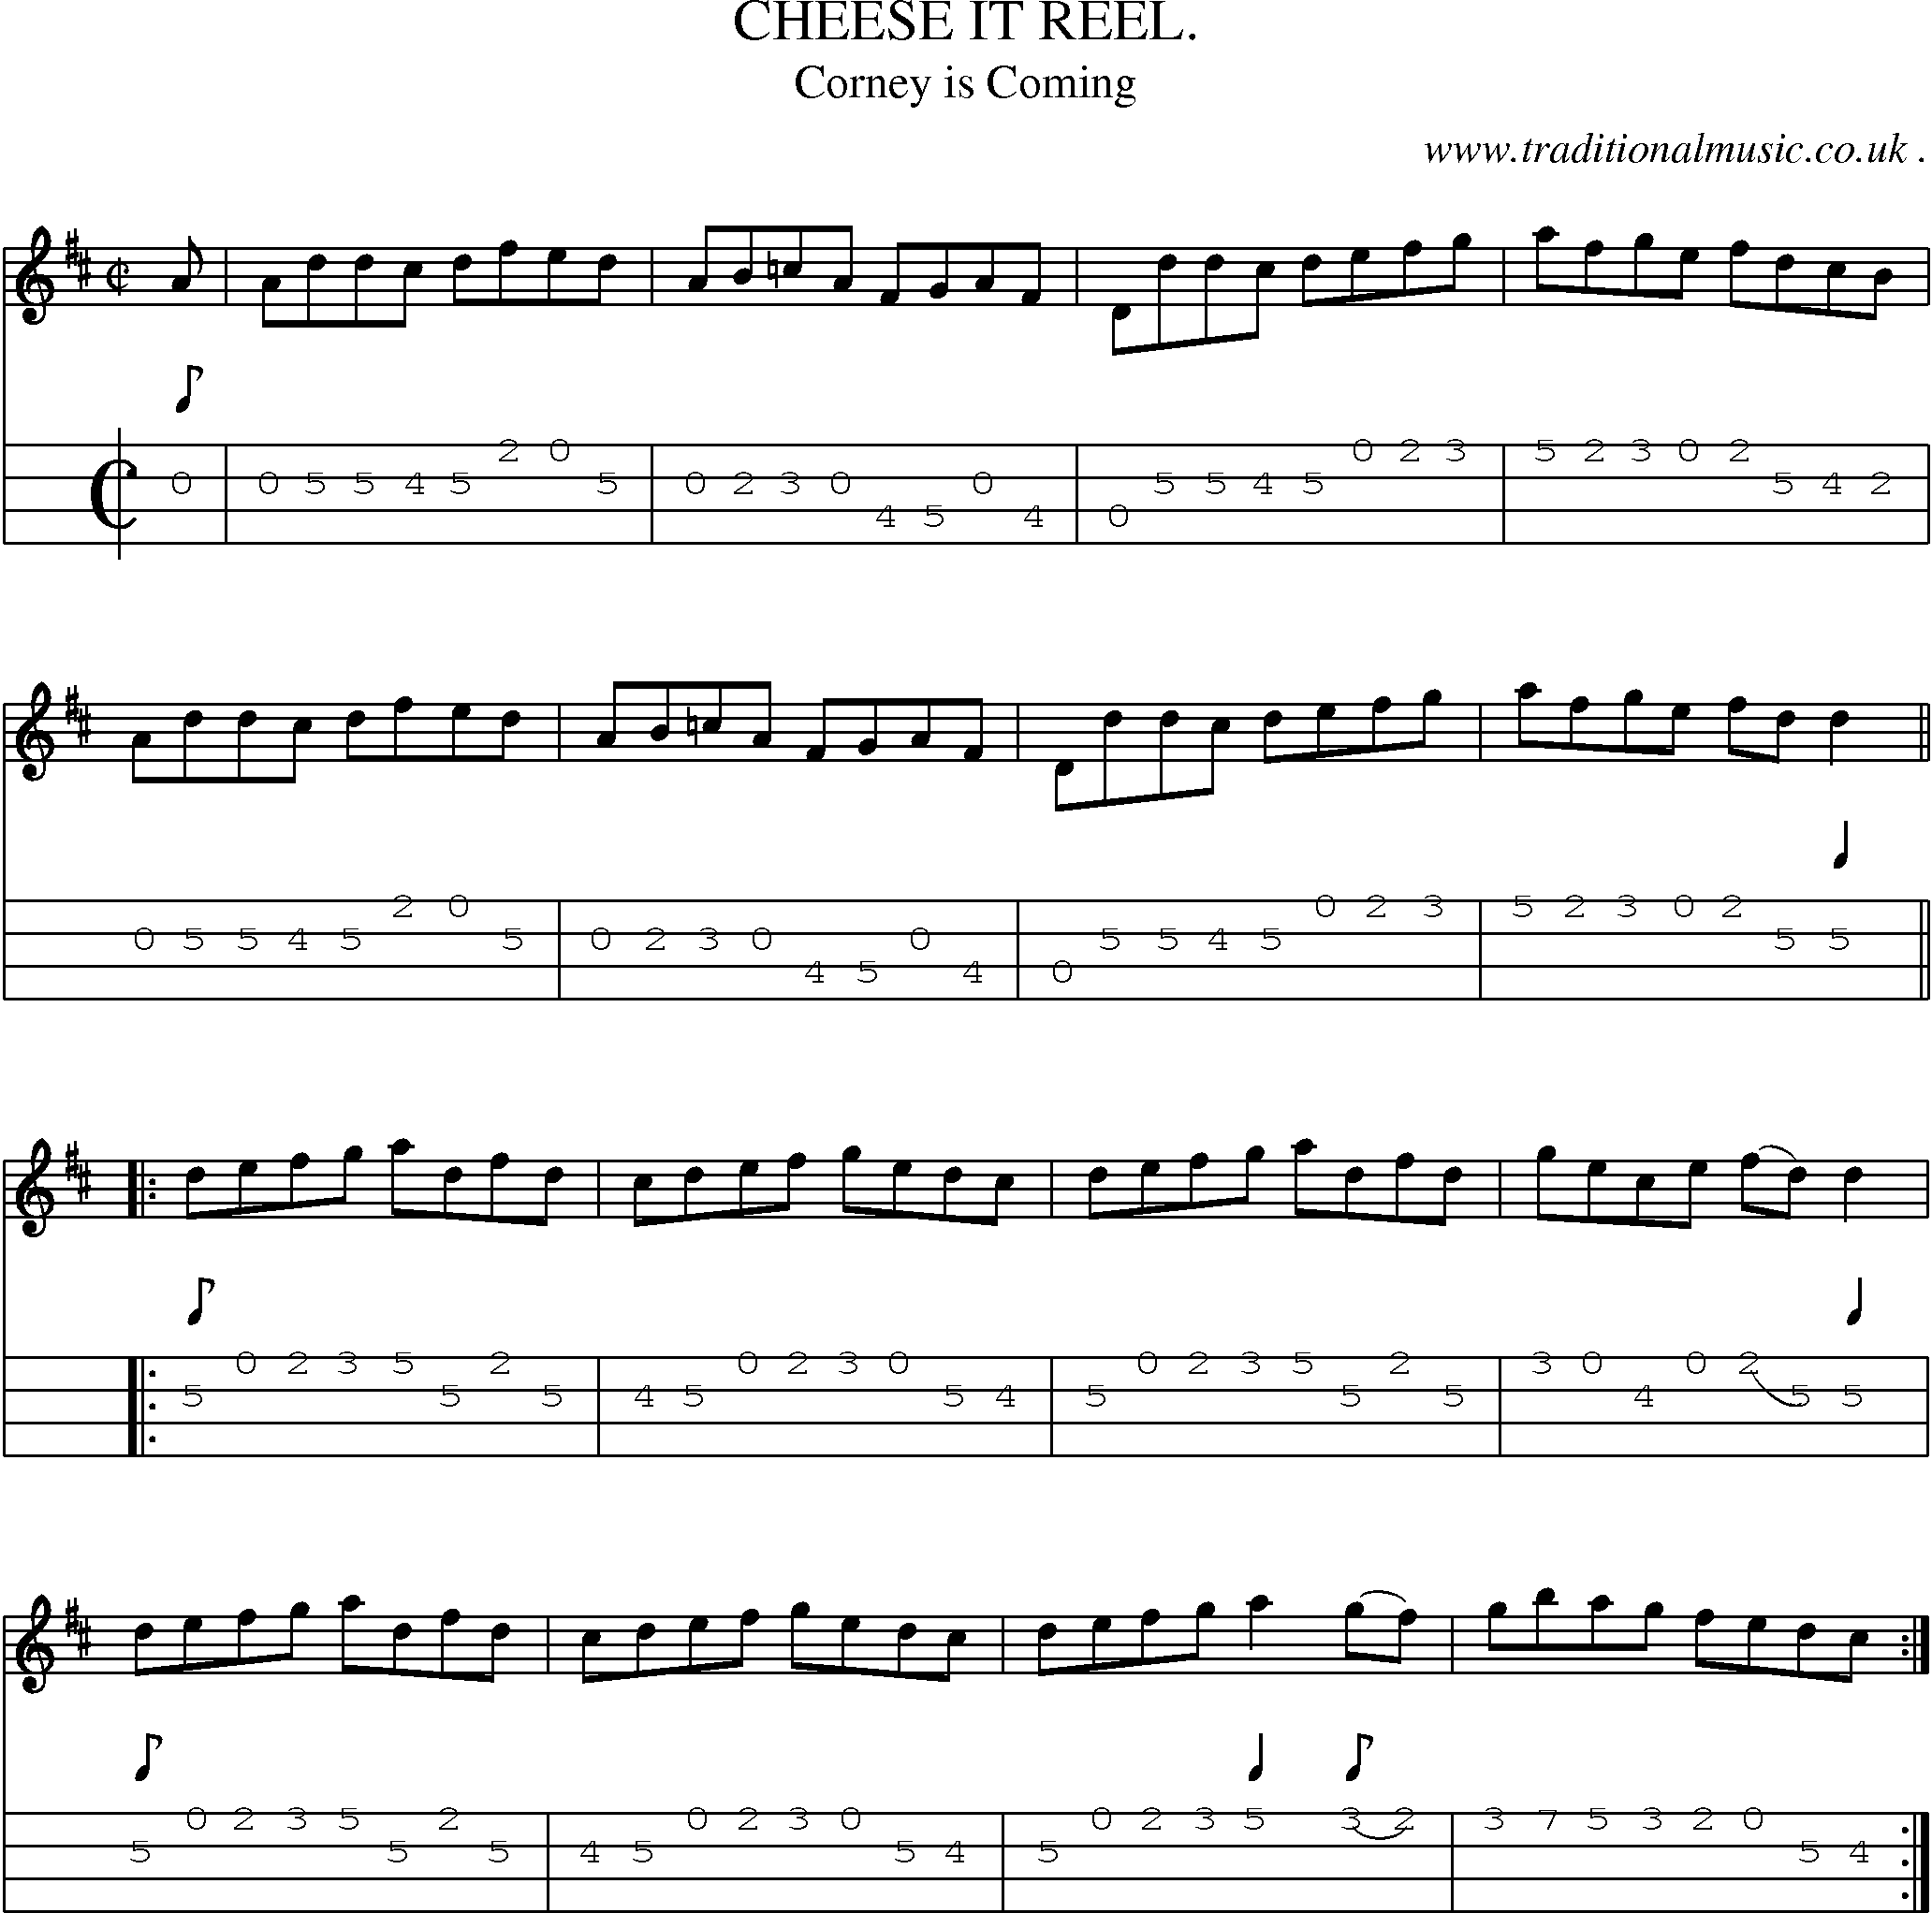 Sheet-Music and Mandolin Tabs for Cheese It Reel